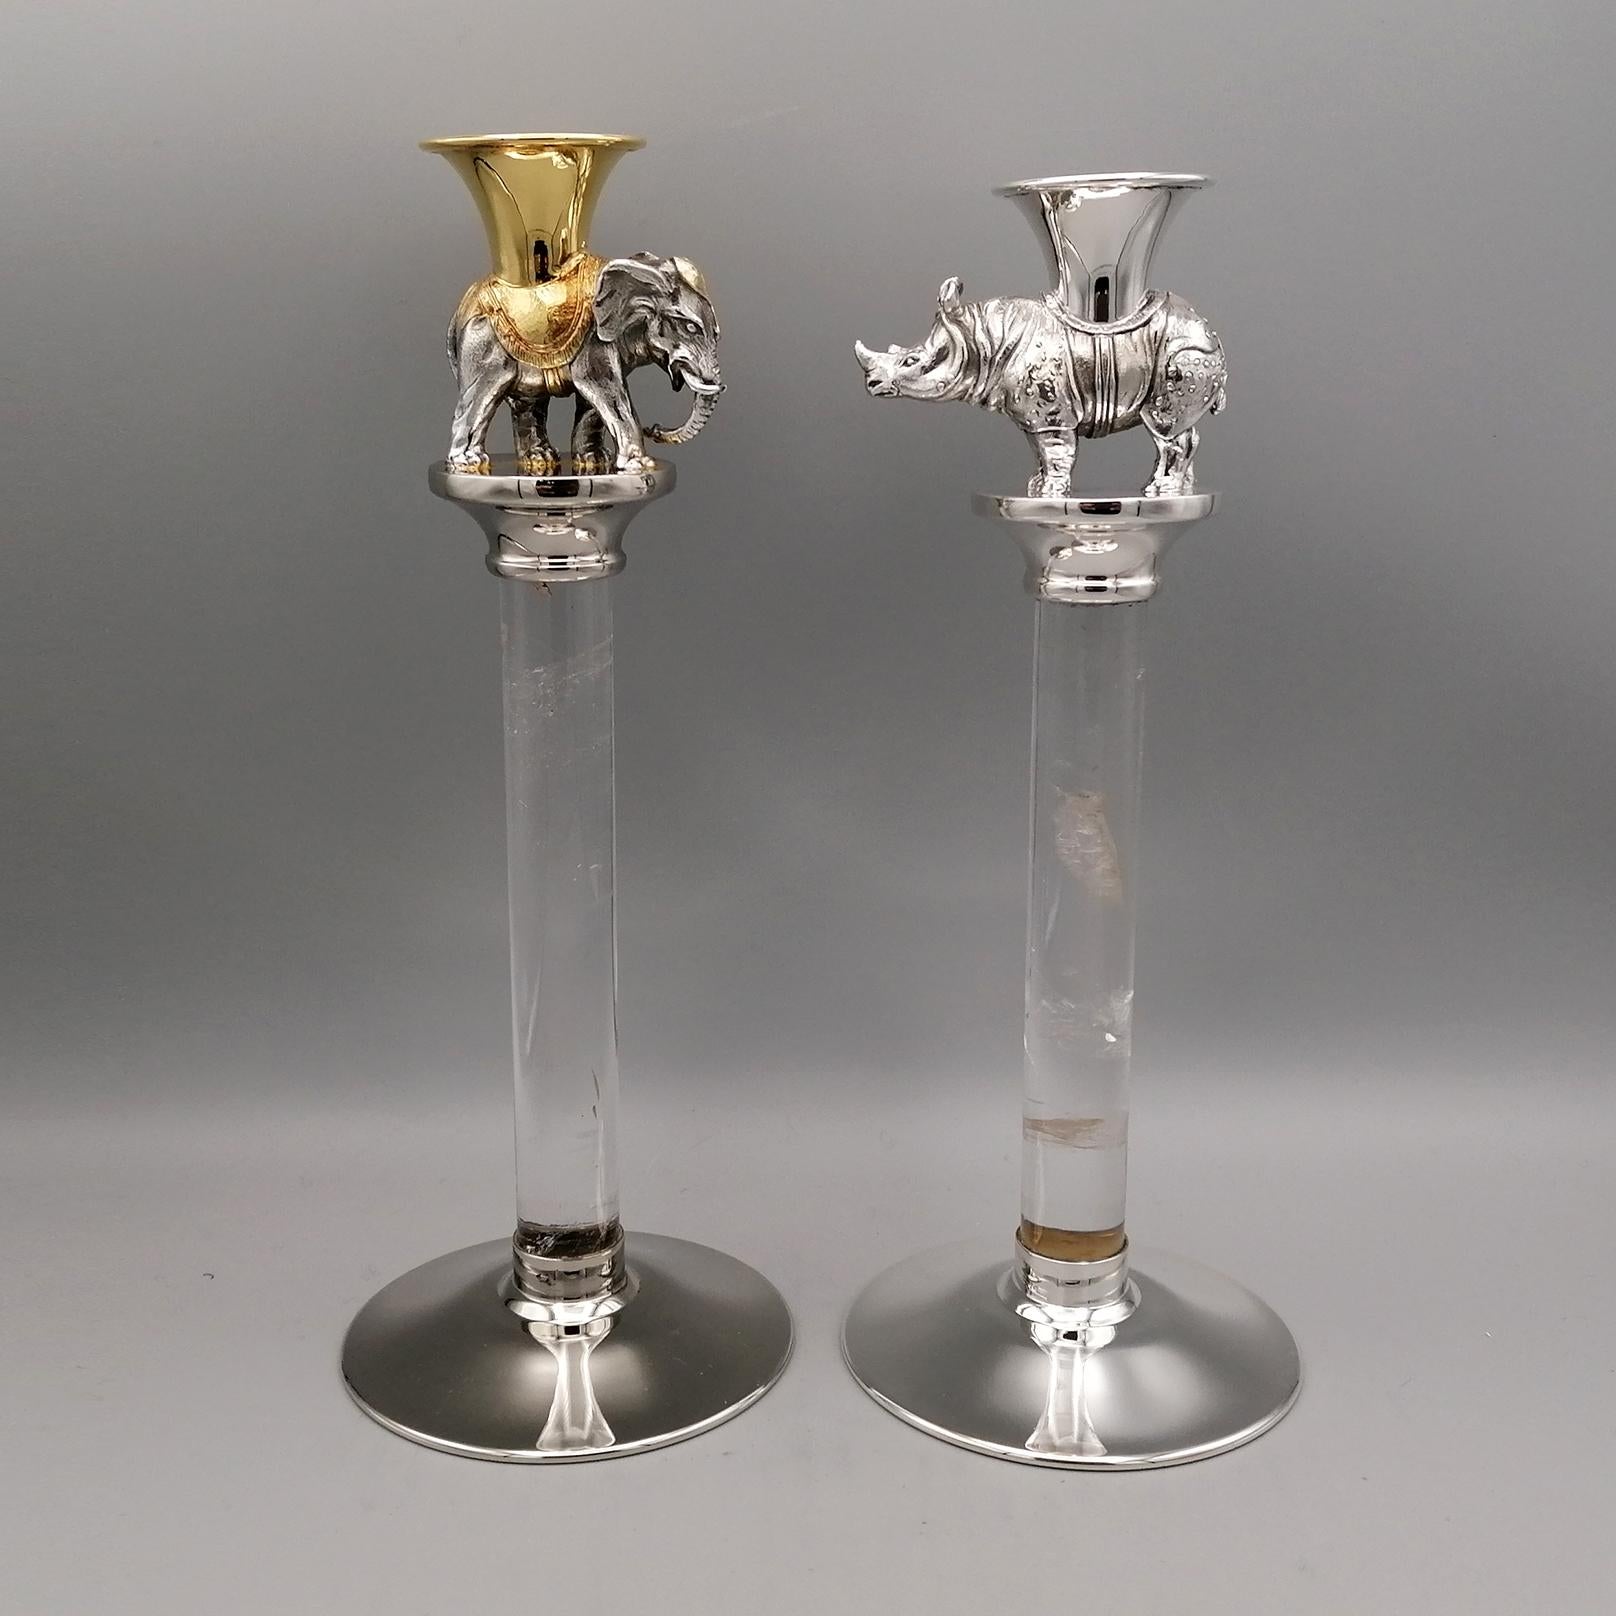 Pair of candlesticks with base and upper part in silver and stem in rock crystal. The two candlesticks were made by the same silversmith, Mario Poli - Milan - Italy but with two different types of animals and finishes.
A candlestick has a smooth